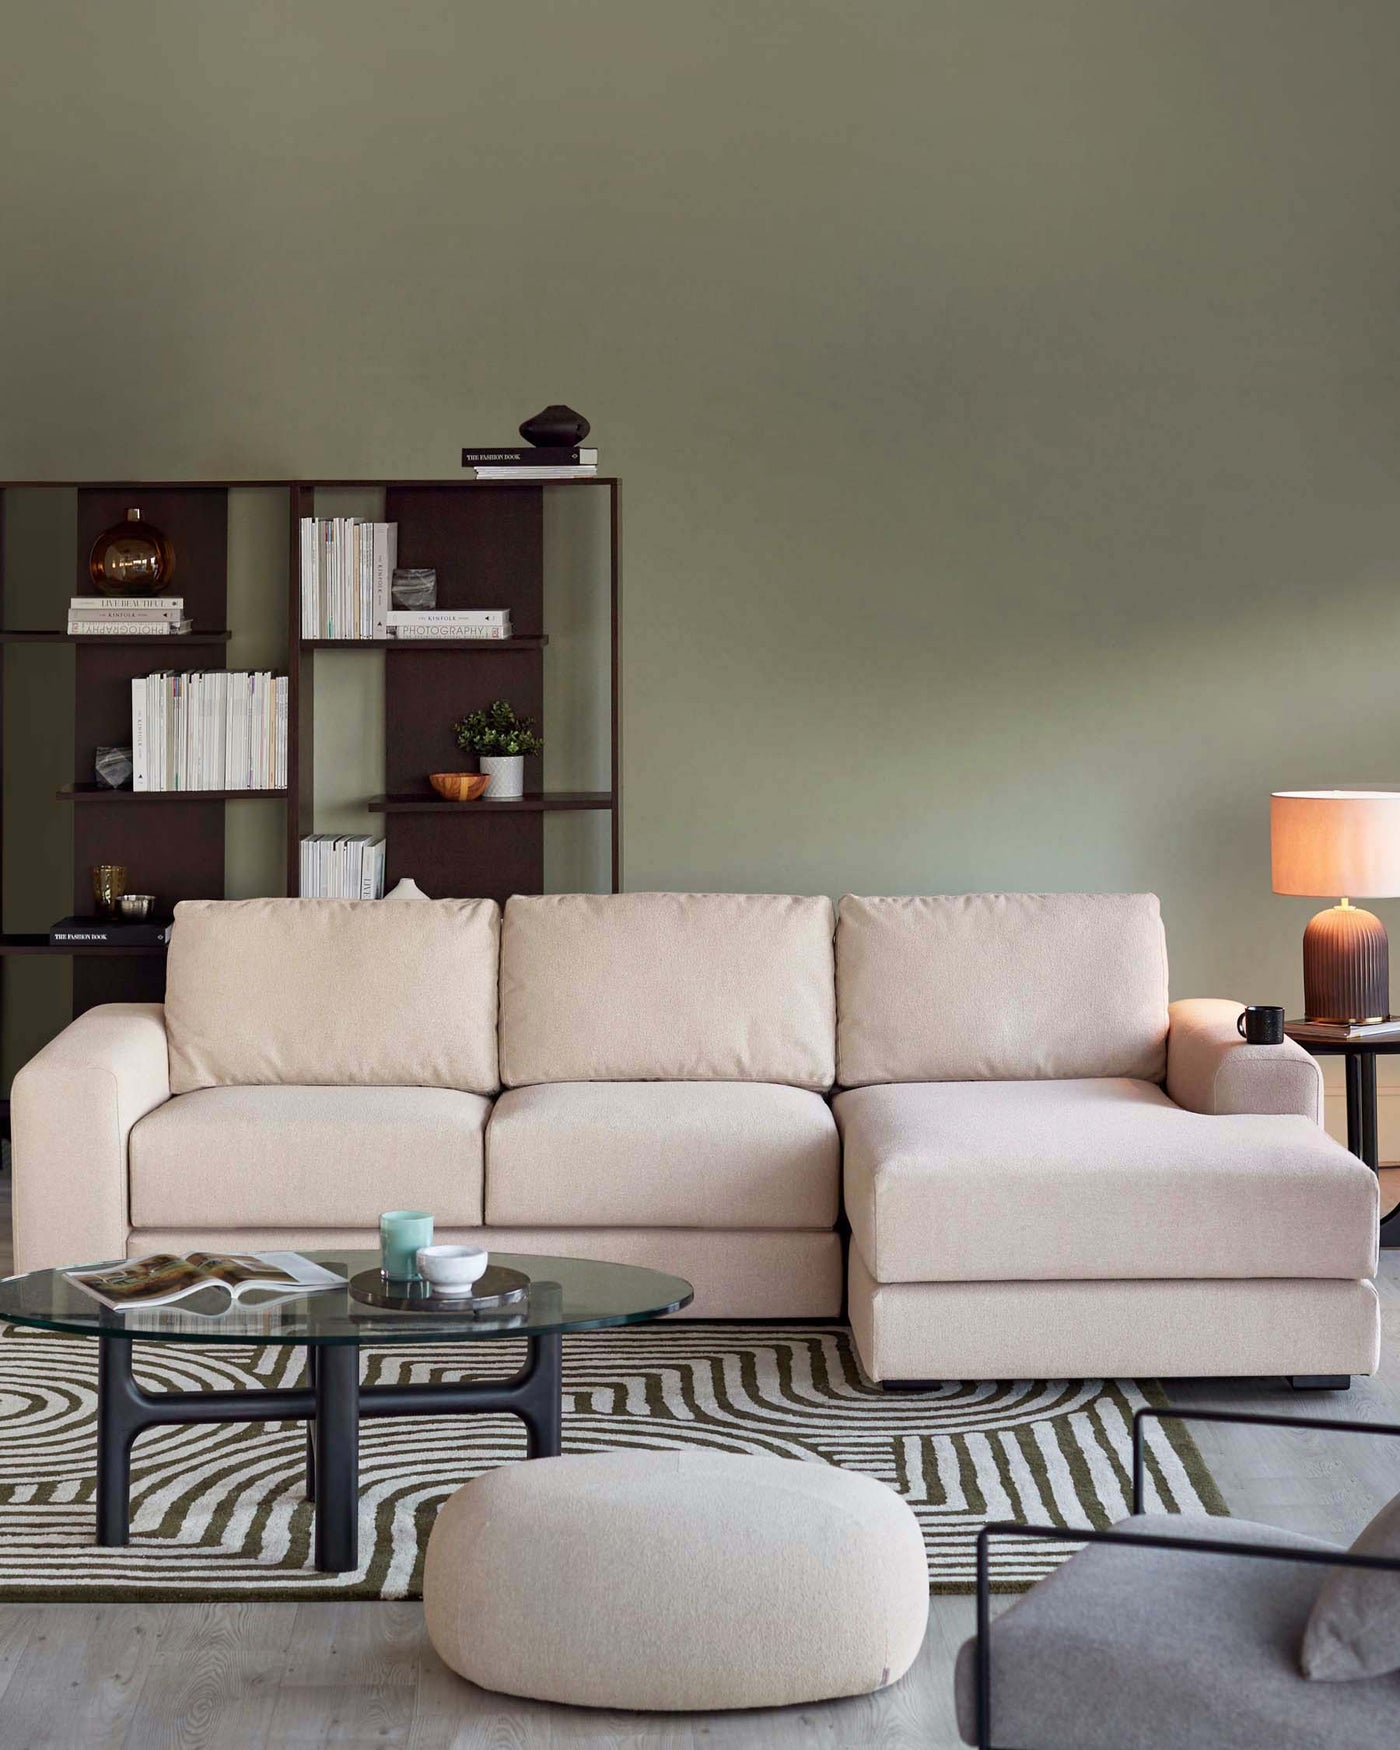 A modern living room featuring a modular beige fabric sectional sofa with clean lines and plush cushions. In front of the sofa is a round glass-top coffee table with a black metal base. To the side sits a matching beige fabric ottoman. The sofa is accessorized with small black reading lamps on either end, and the room is completed with a textured beige and grey striped area rug. Behind the sofa, there is a dark-toned wooden bookshelf filled with an assortment of books and decorative items.